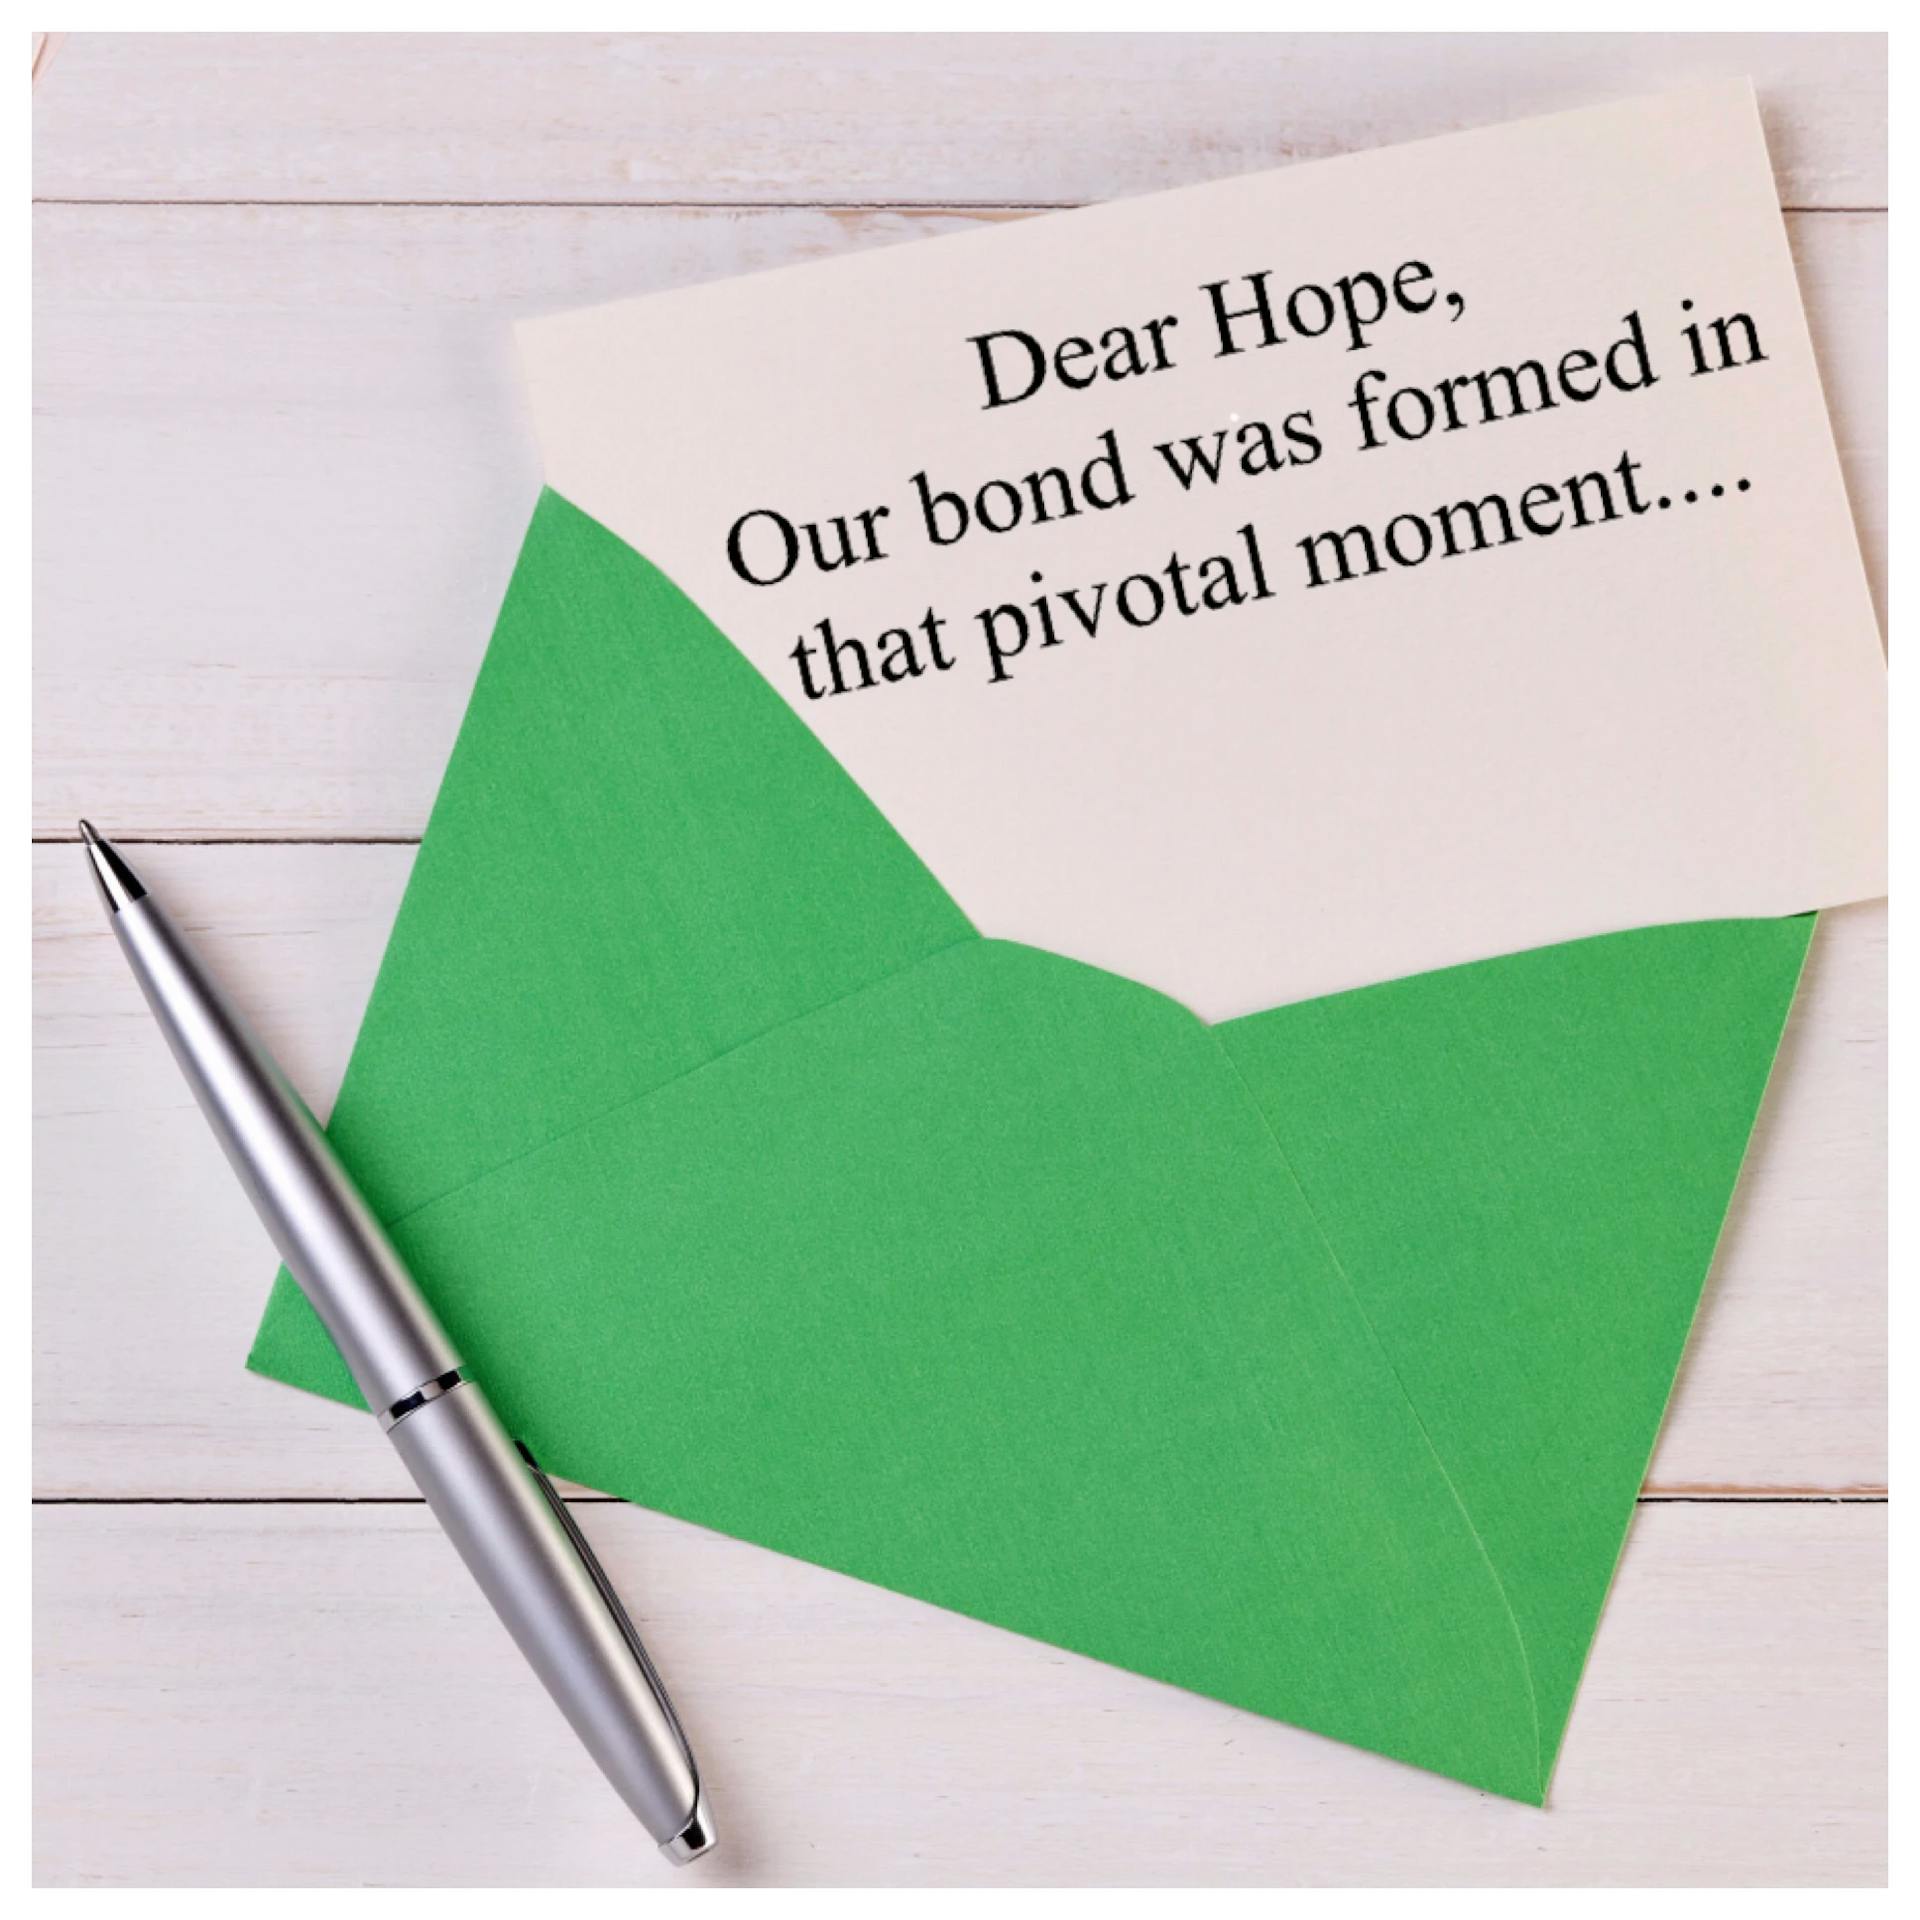 A green envelope containing a letter to hope.